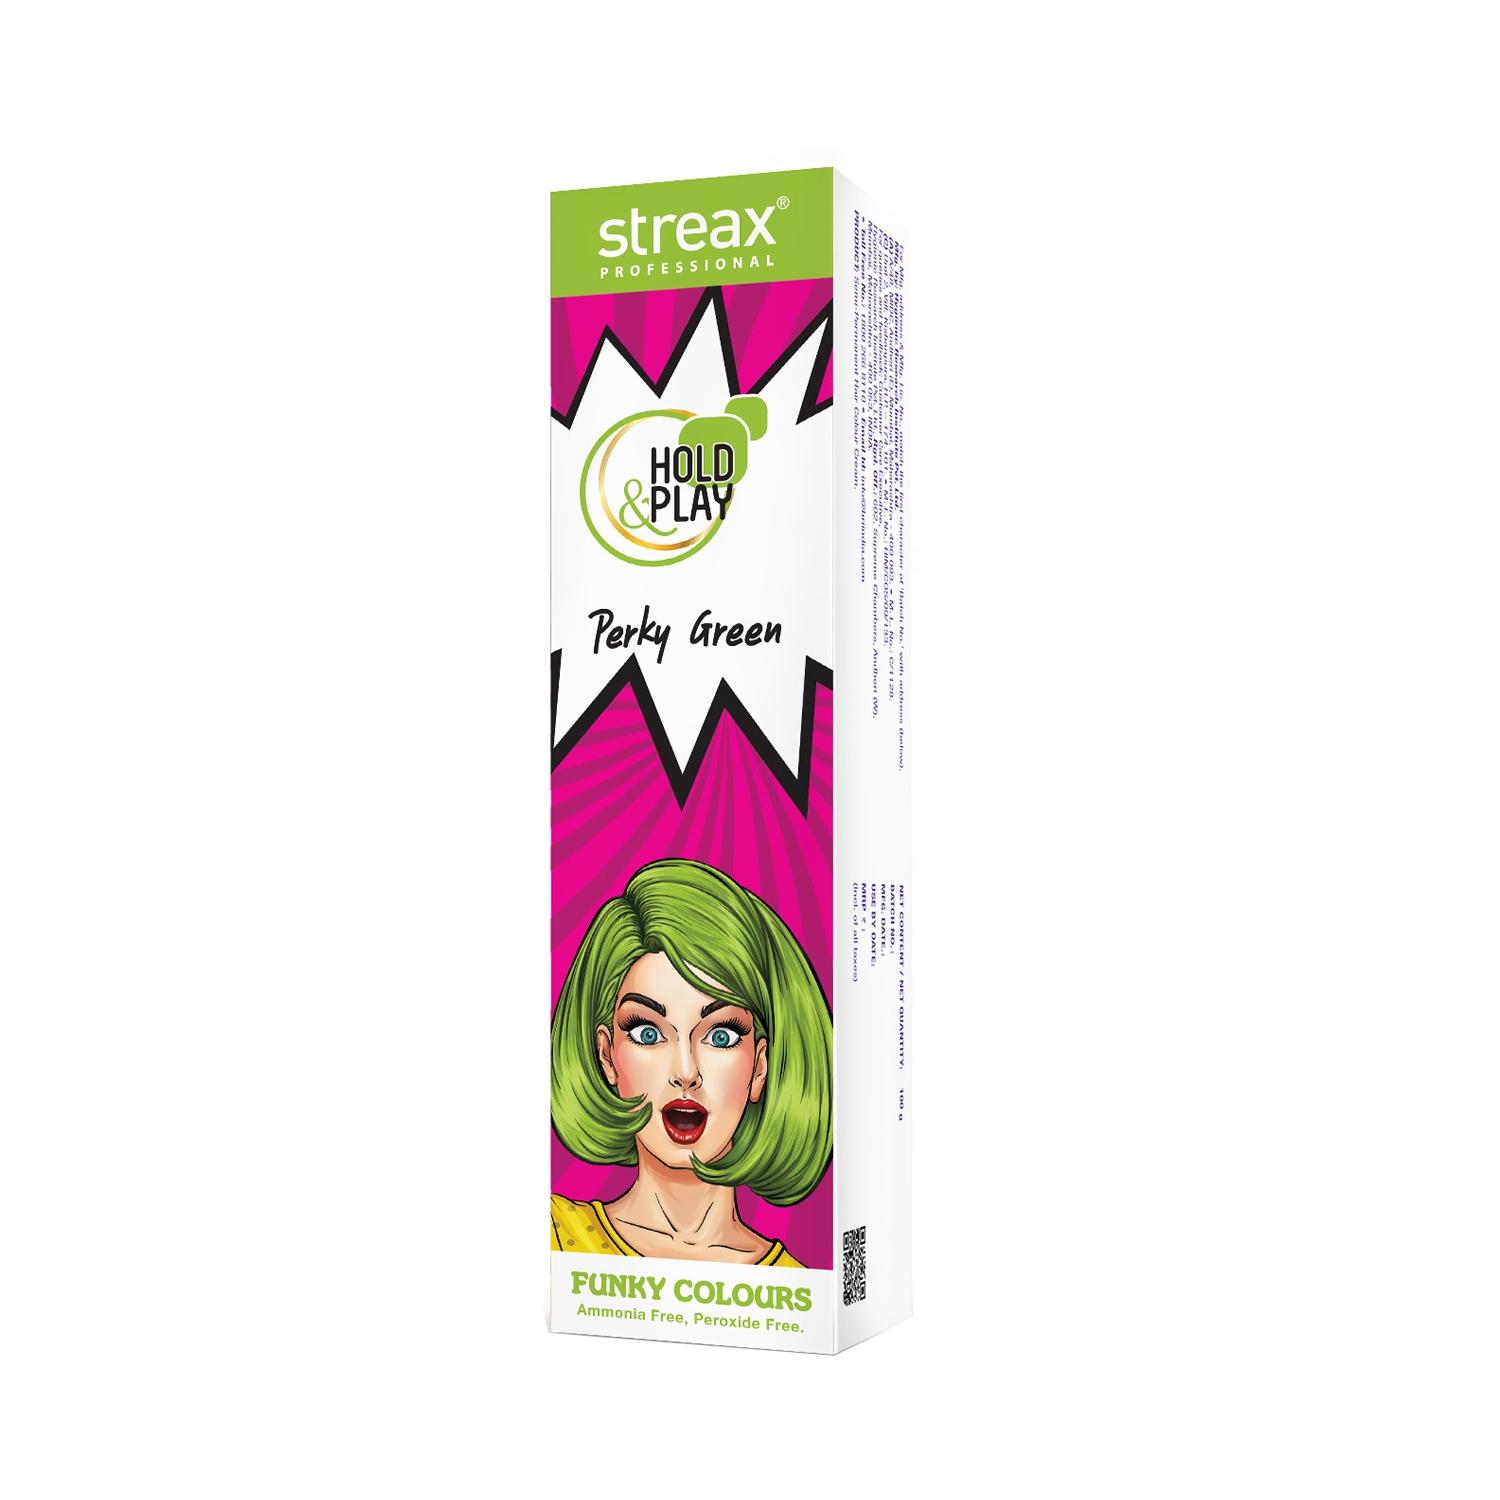 streax professional hold & play funky hair color - perky green (100g)